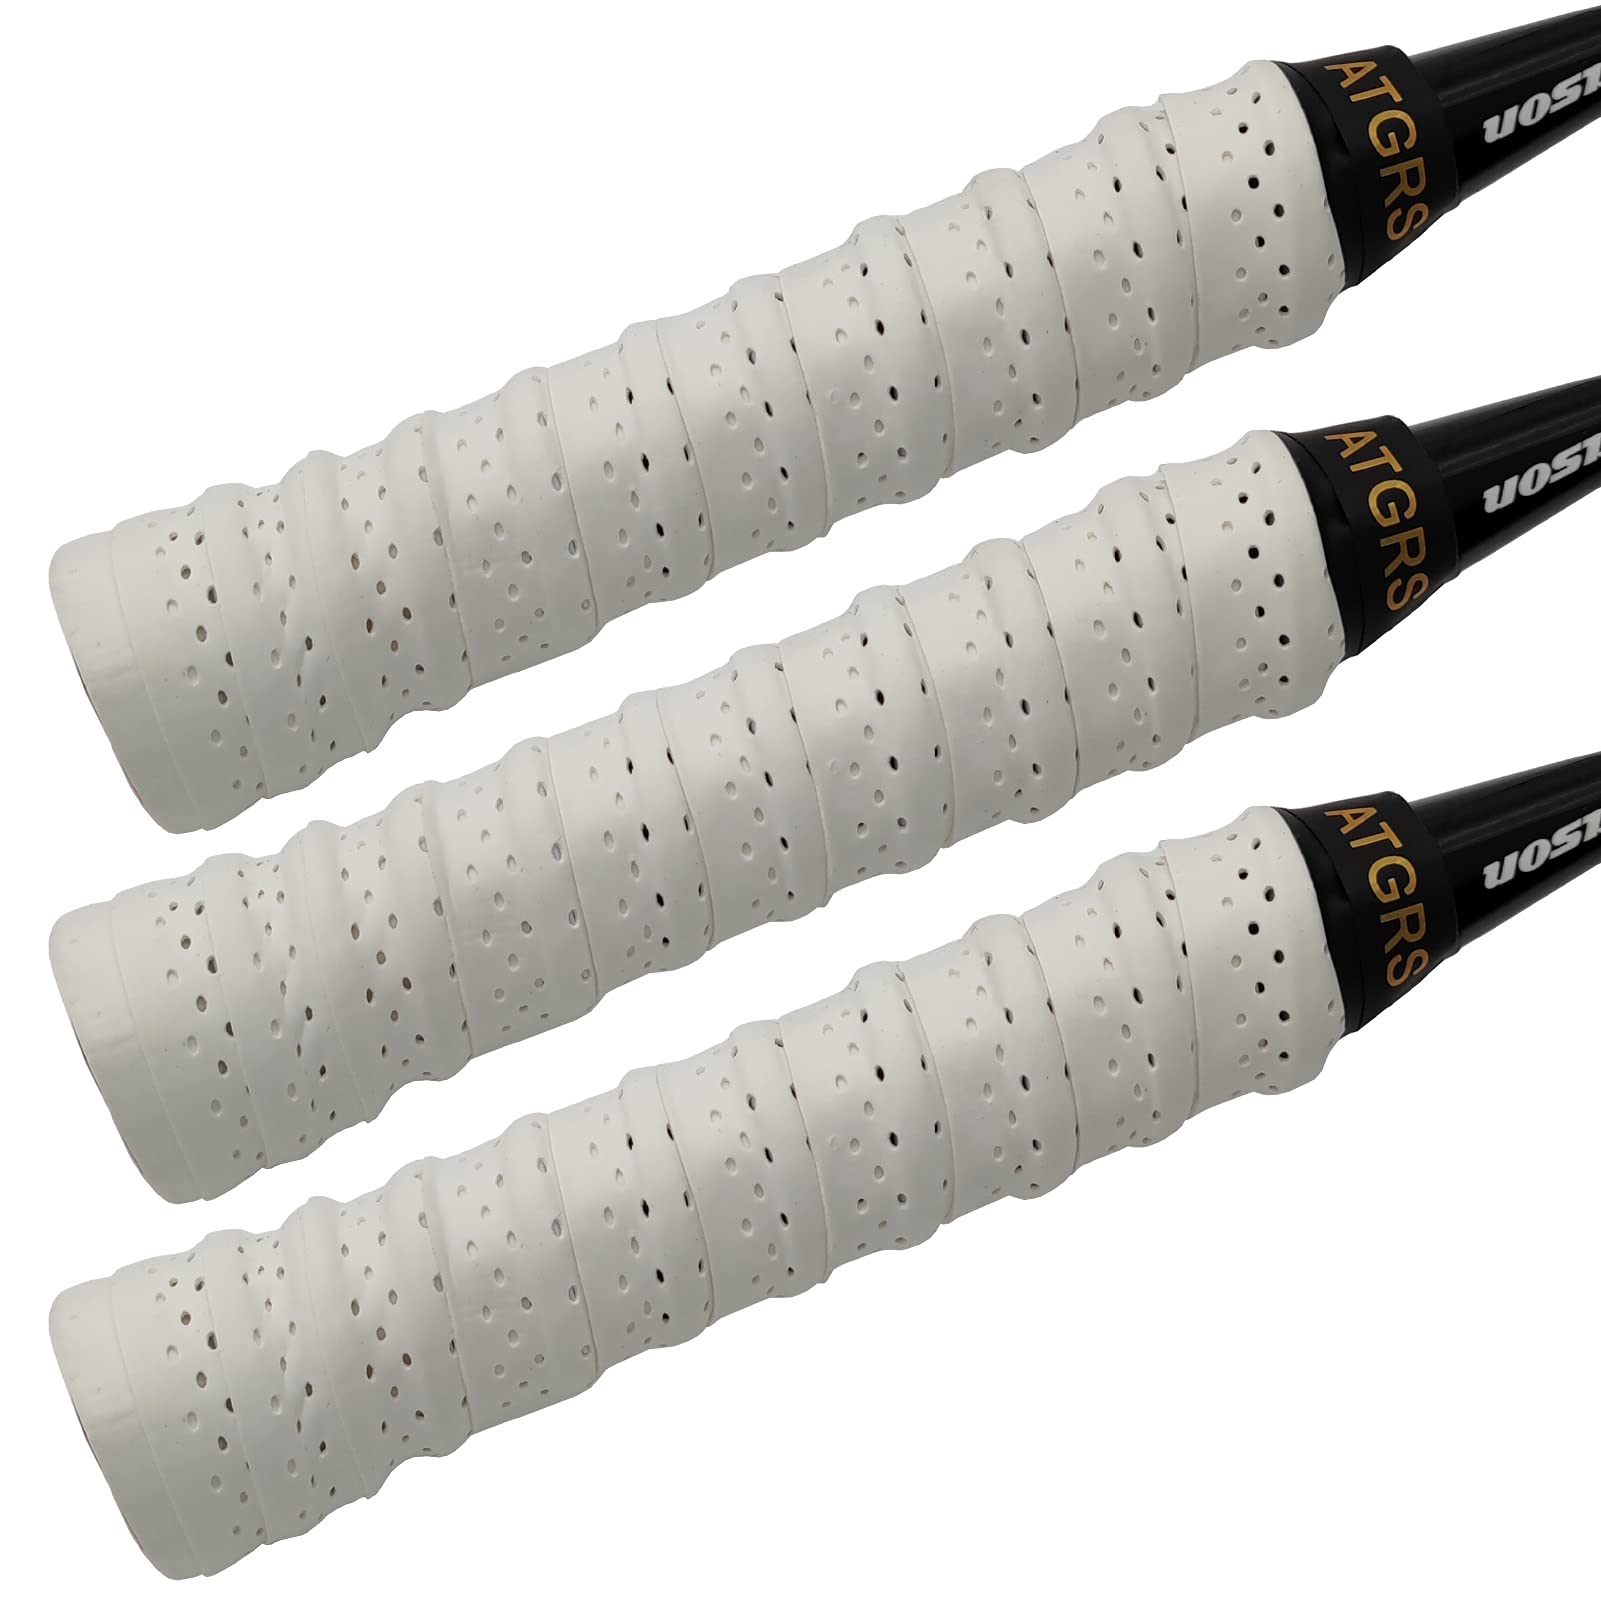 Tennis Vibration dampeners: Enhancing Your Grip for Better Accuracy